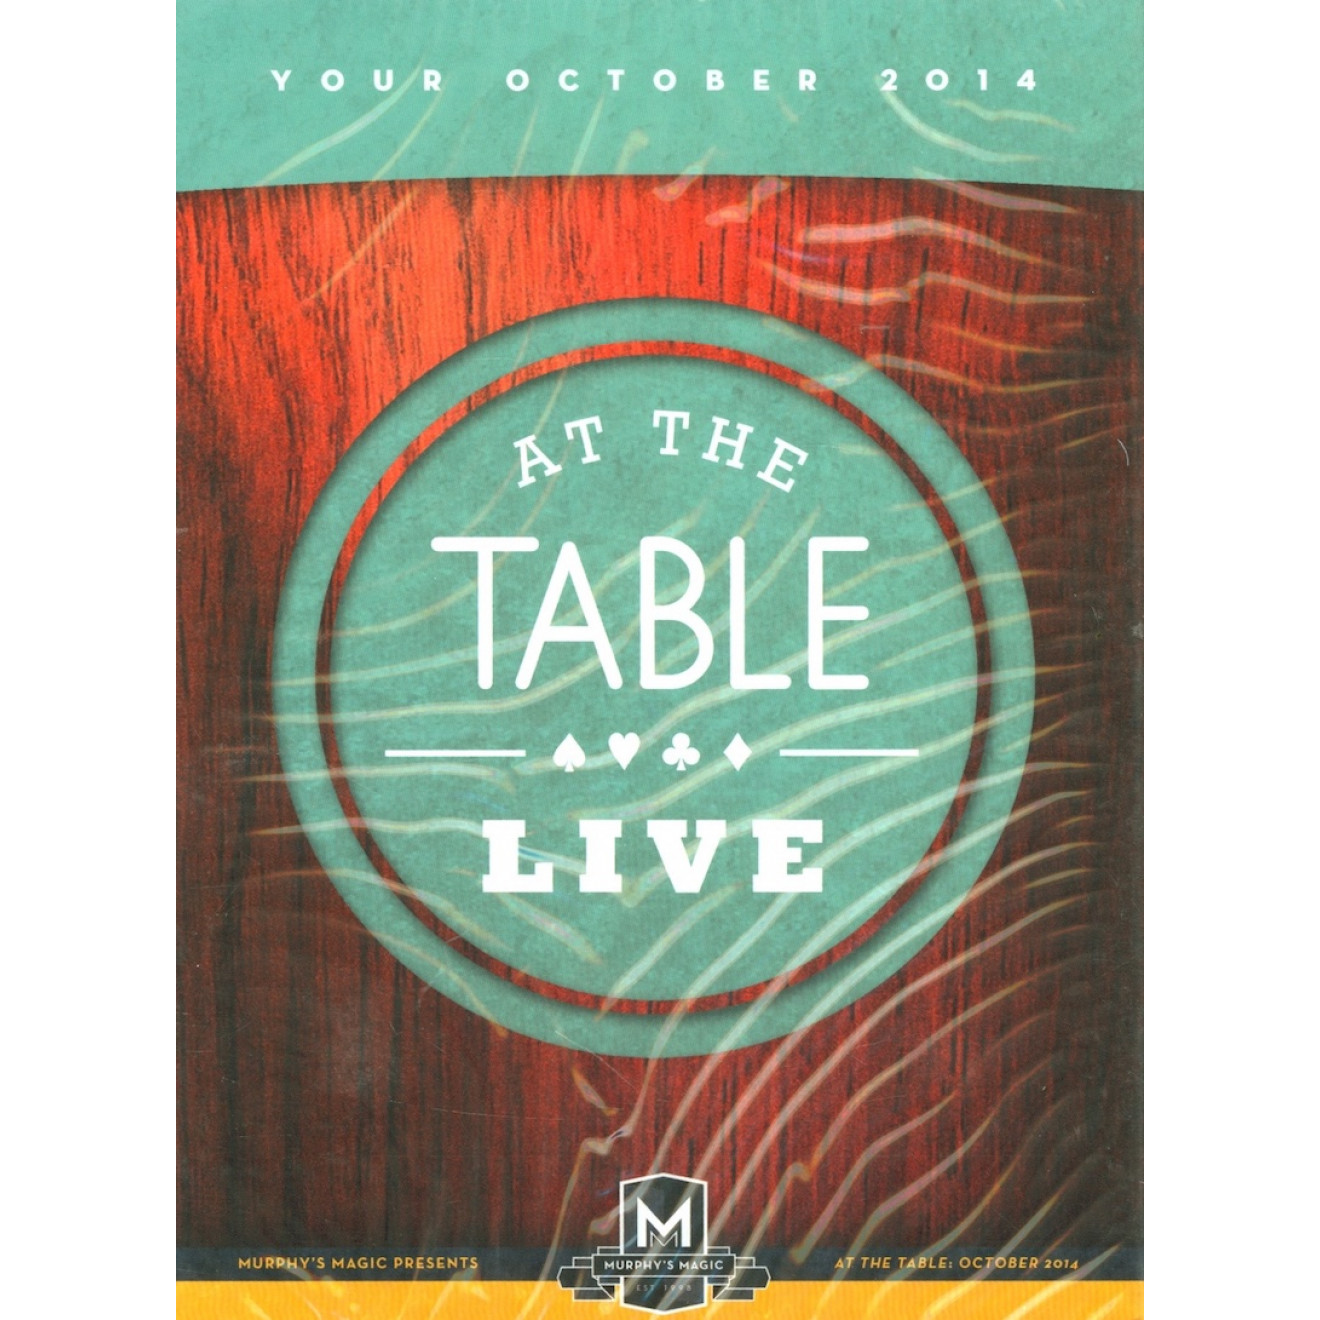 At the Table Live Lecture October 2014 (5 DVD Set)